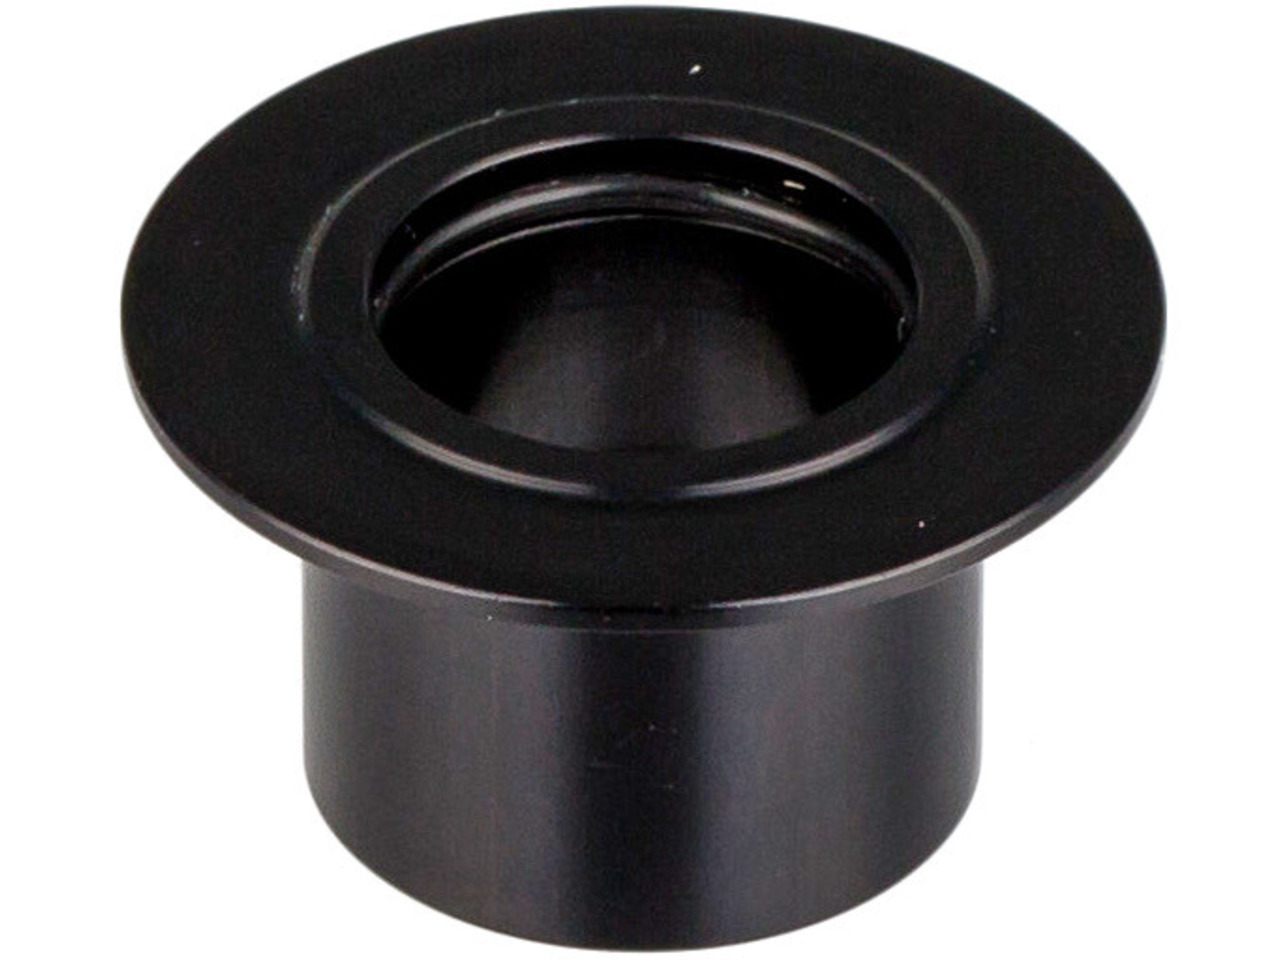 DT Swiss X-12 / 12x142 Right End Cap for 240s